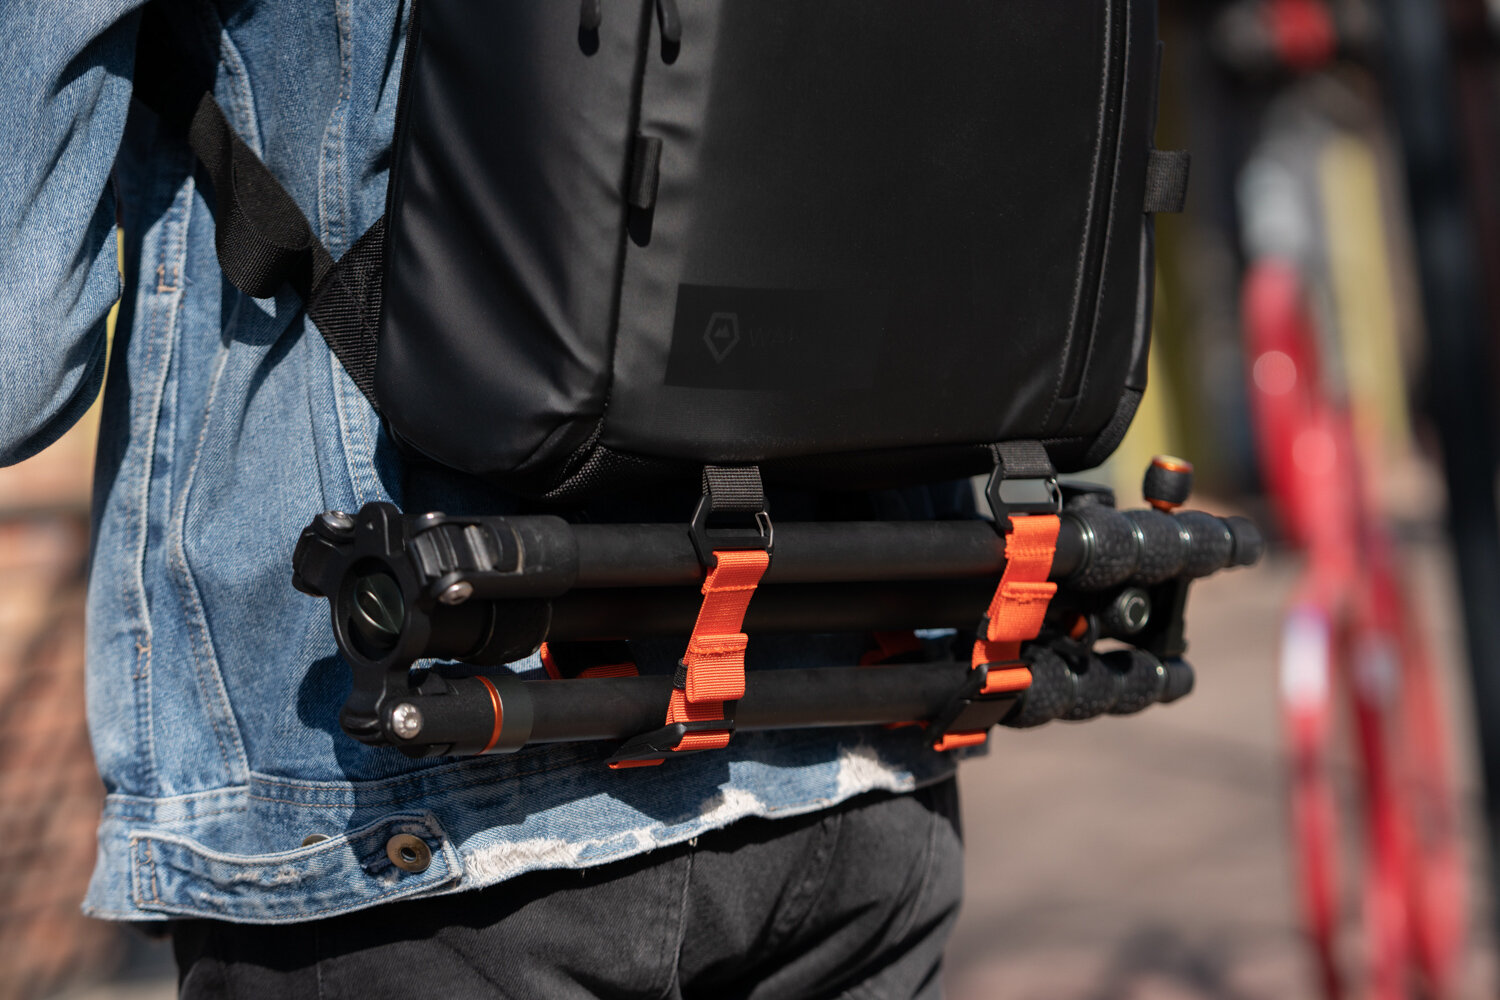 Optional Accessory Straps for External Carry